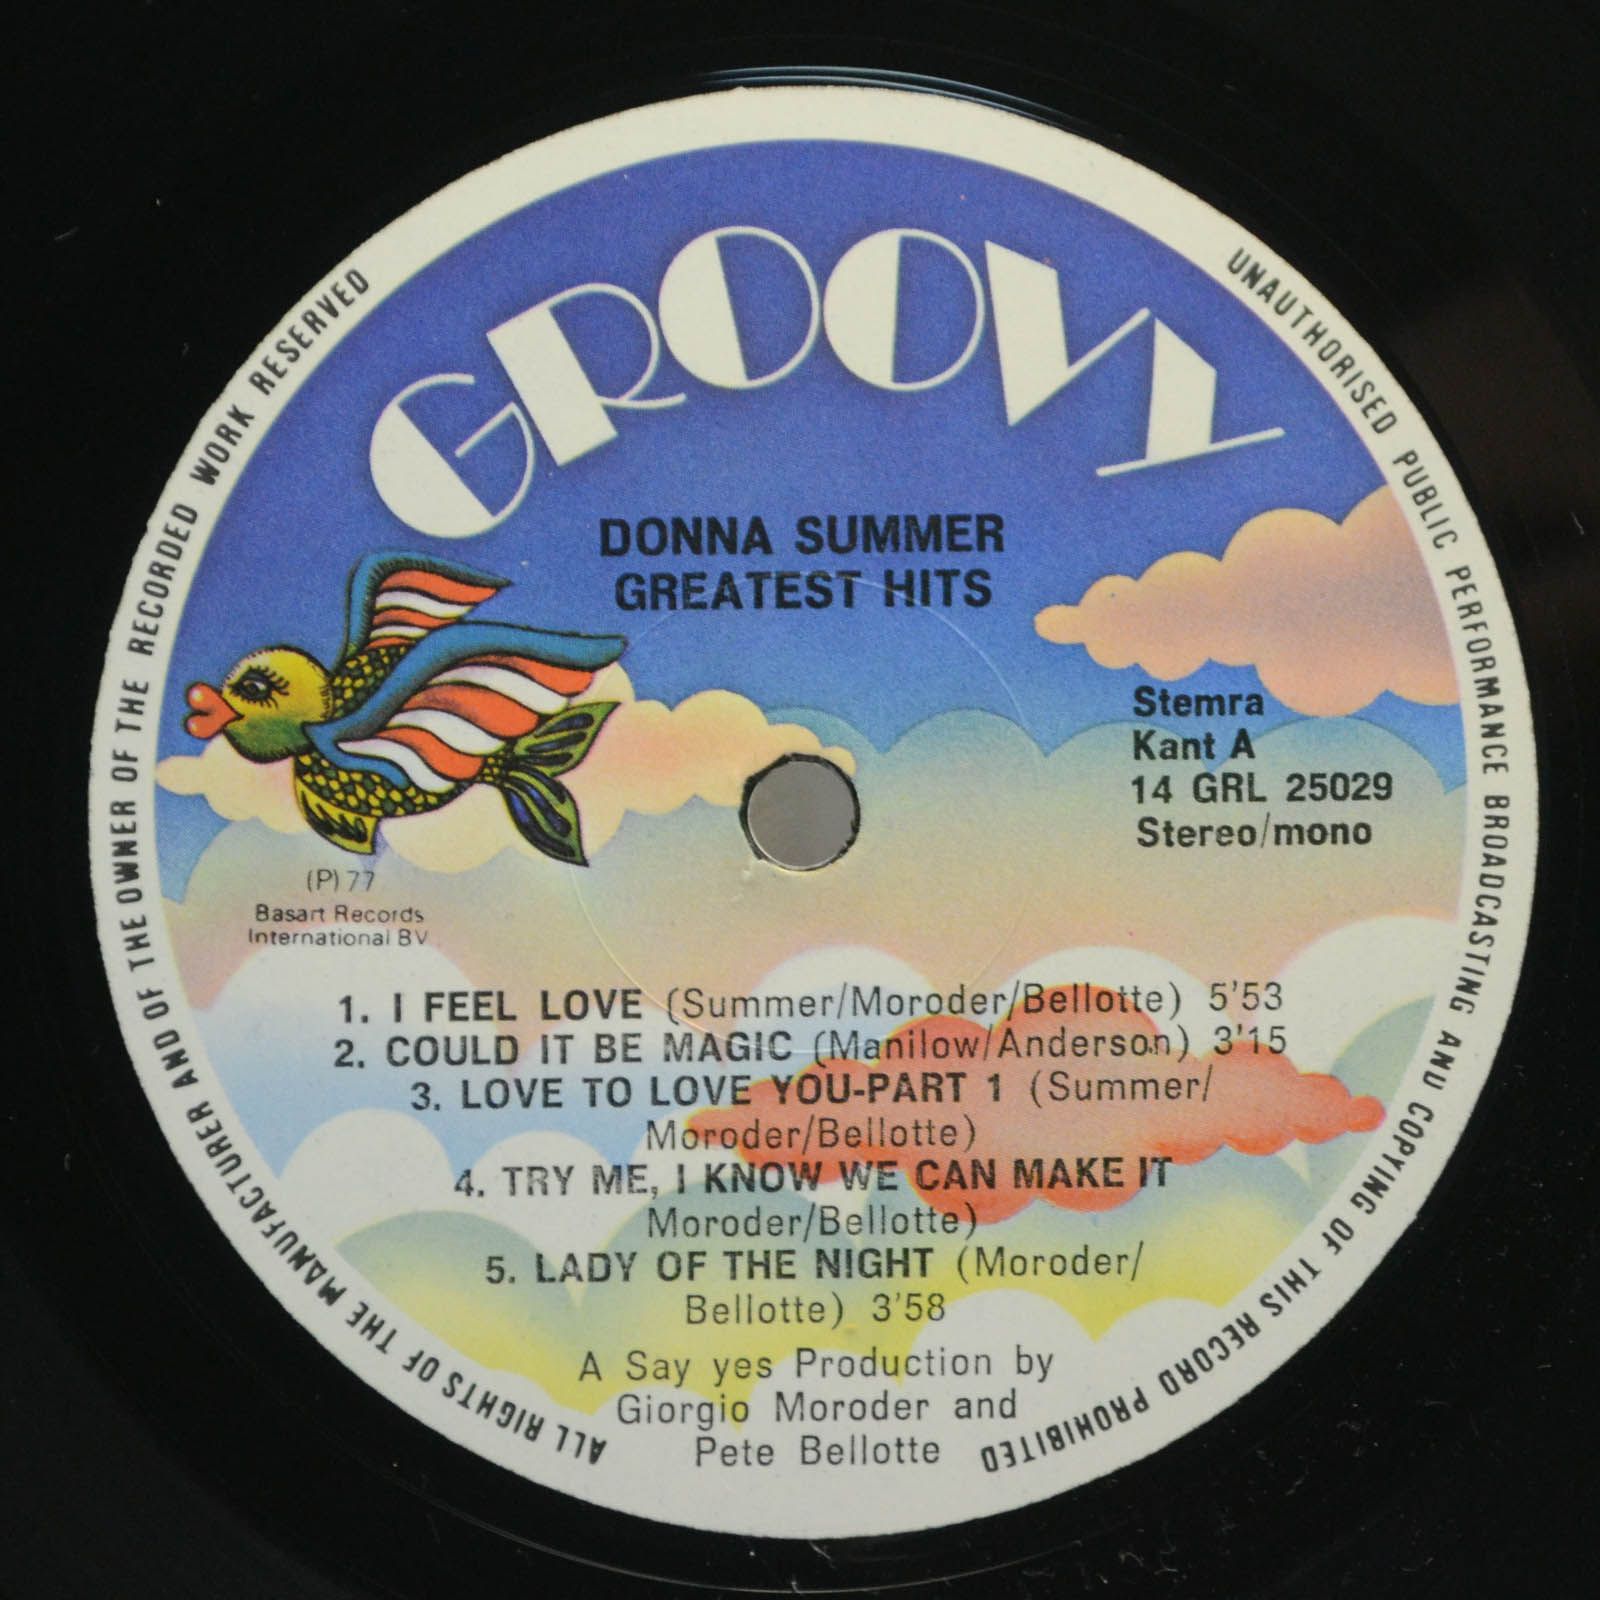 Donna Summer — Greatest Hits, 1977